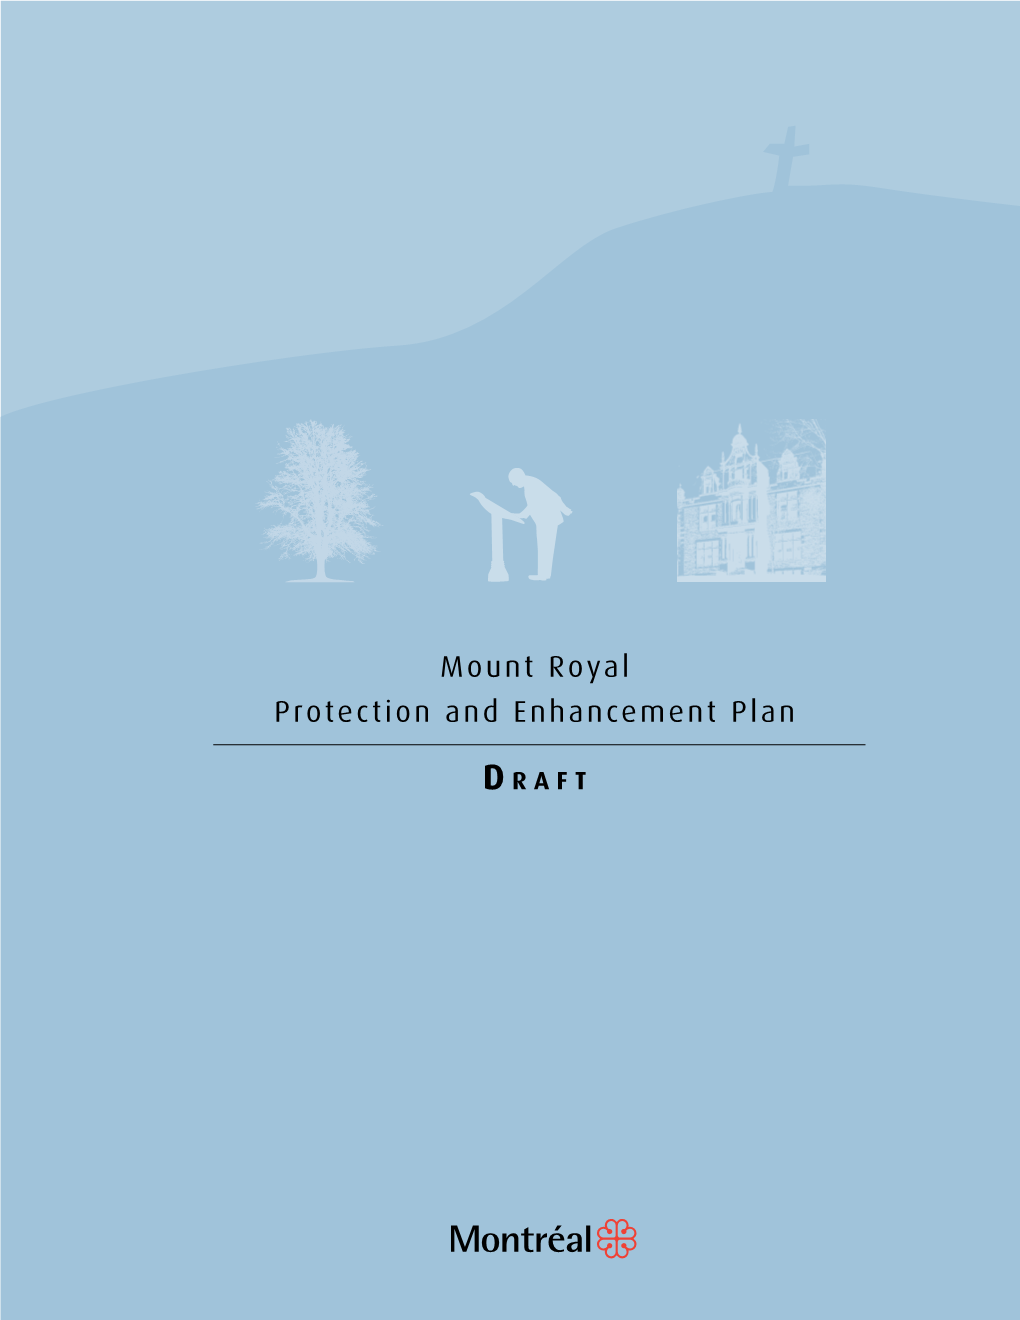 Mount Royal Protection and Enhancement Plan